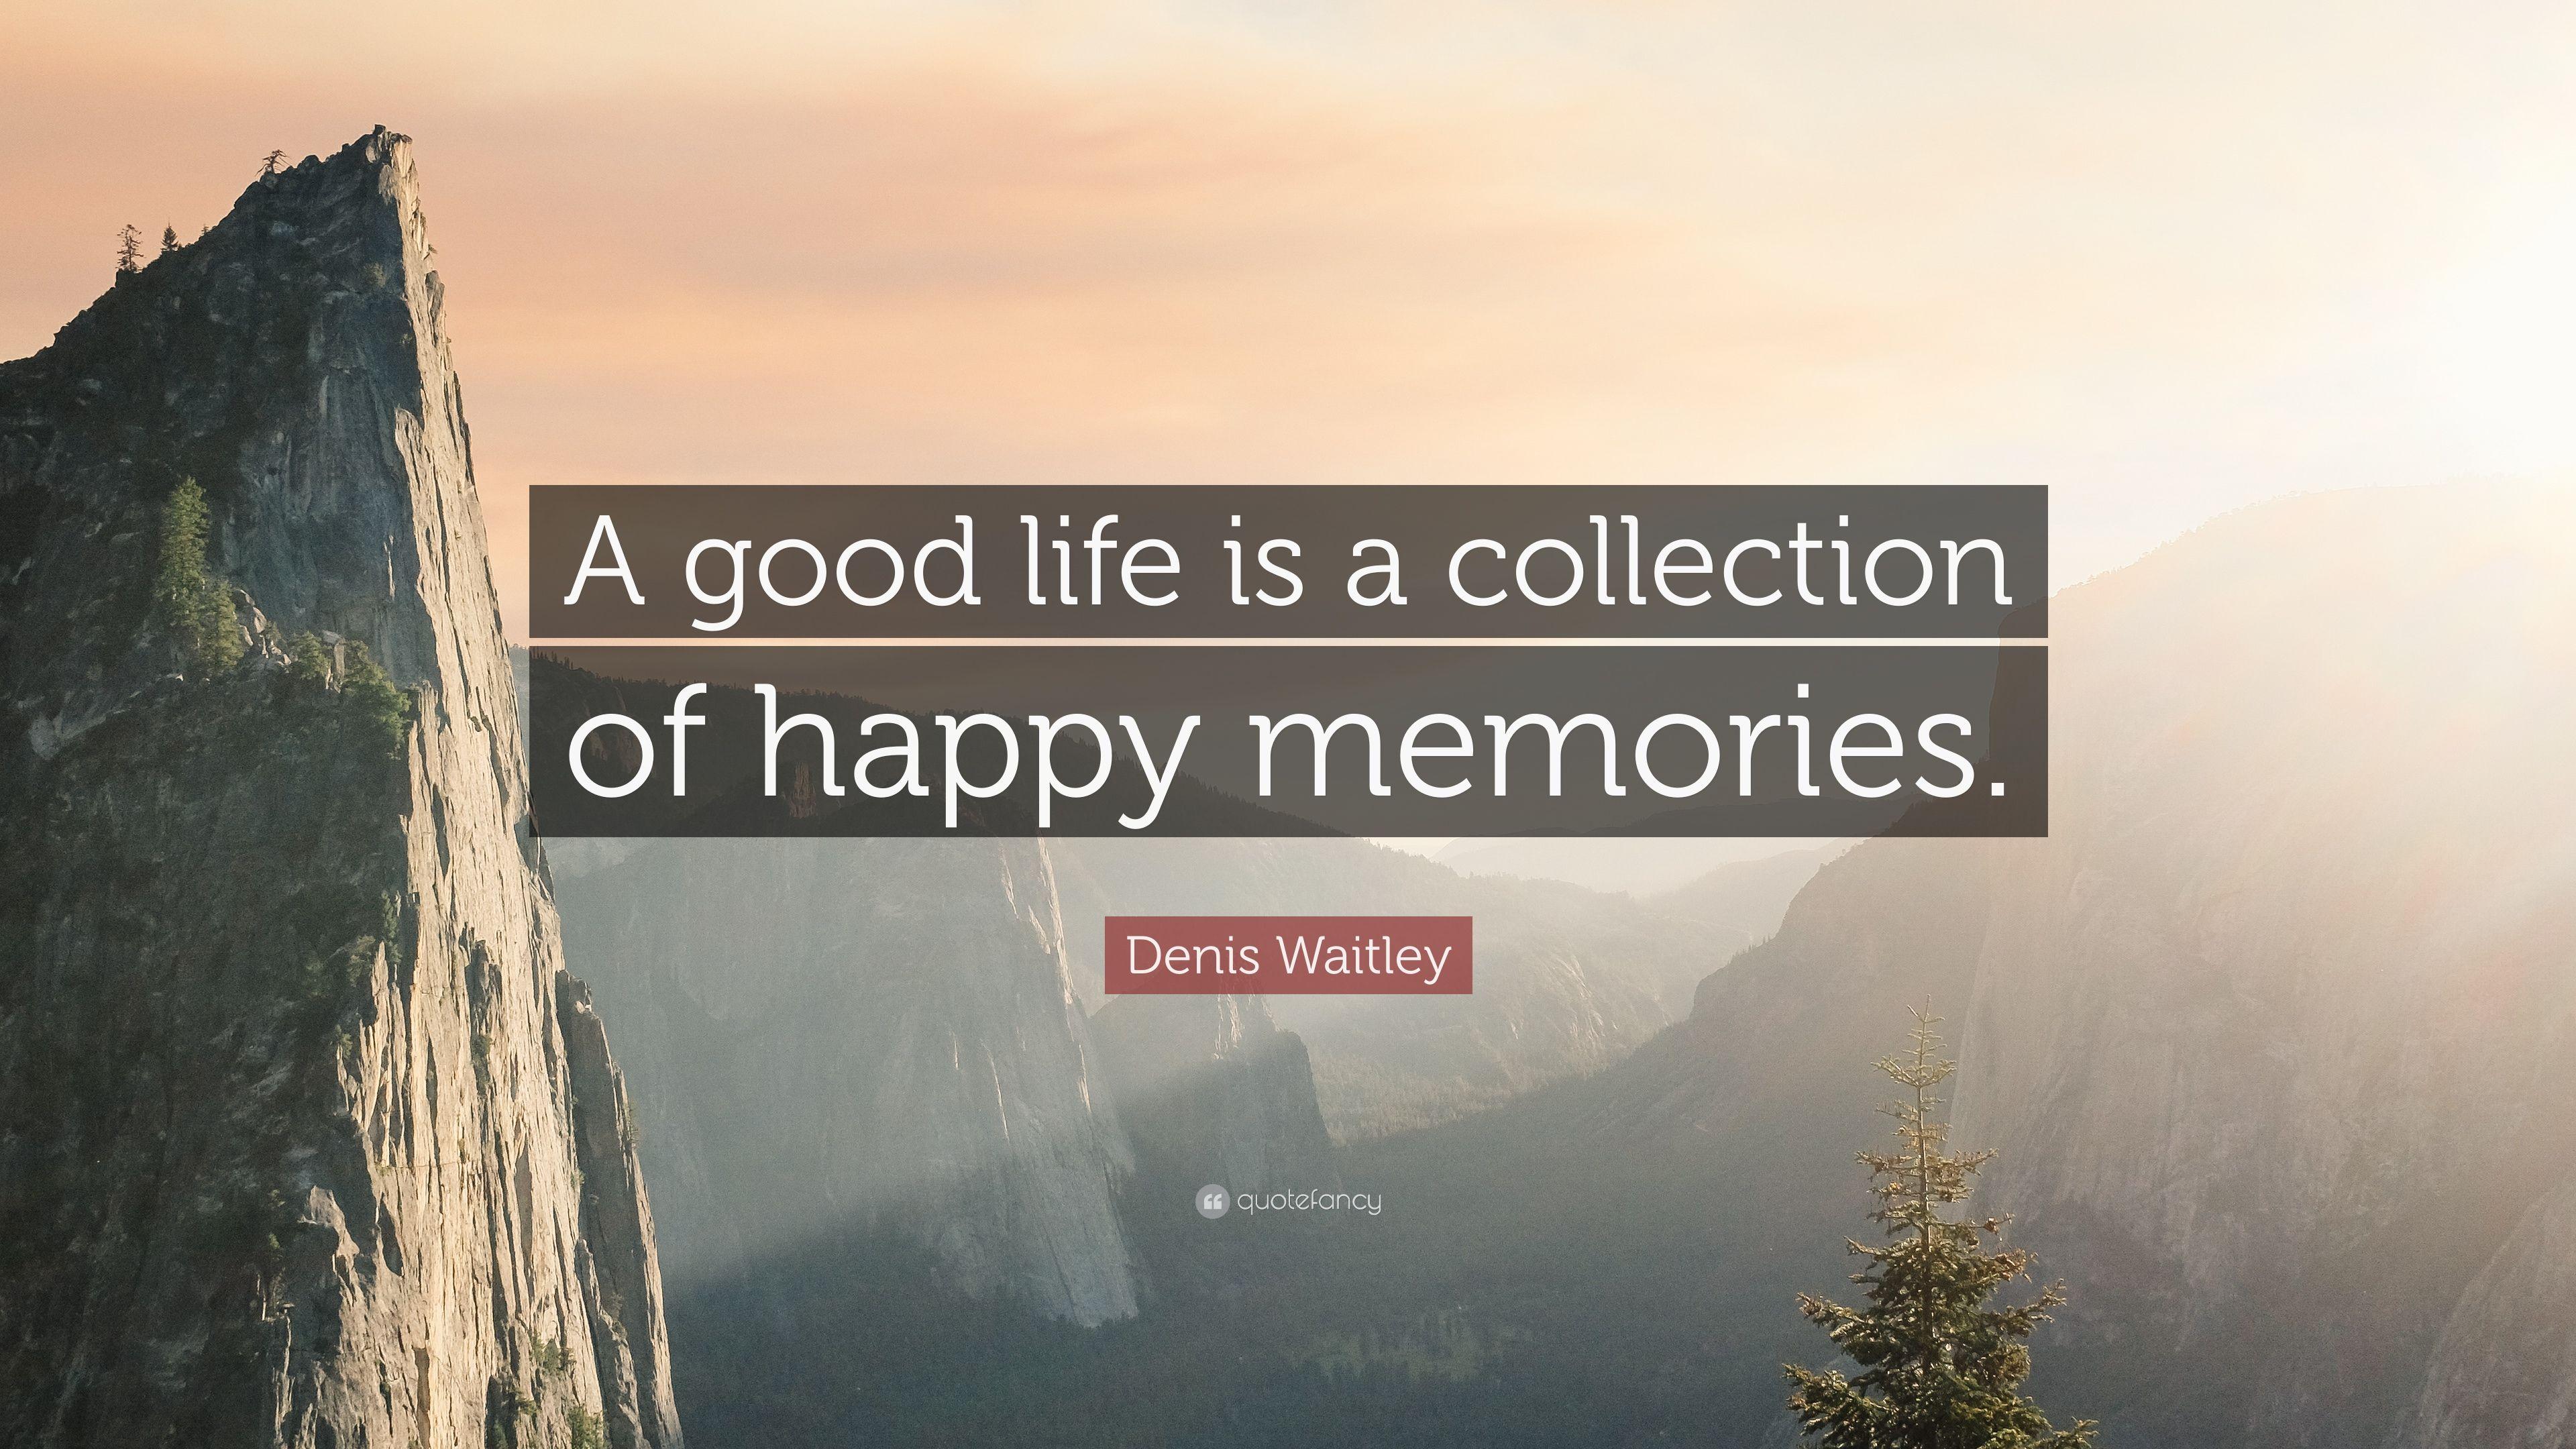 Denis Waitley Quote: “A good life is a collection of happy memories.” (12 wallpaper)